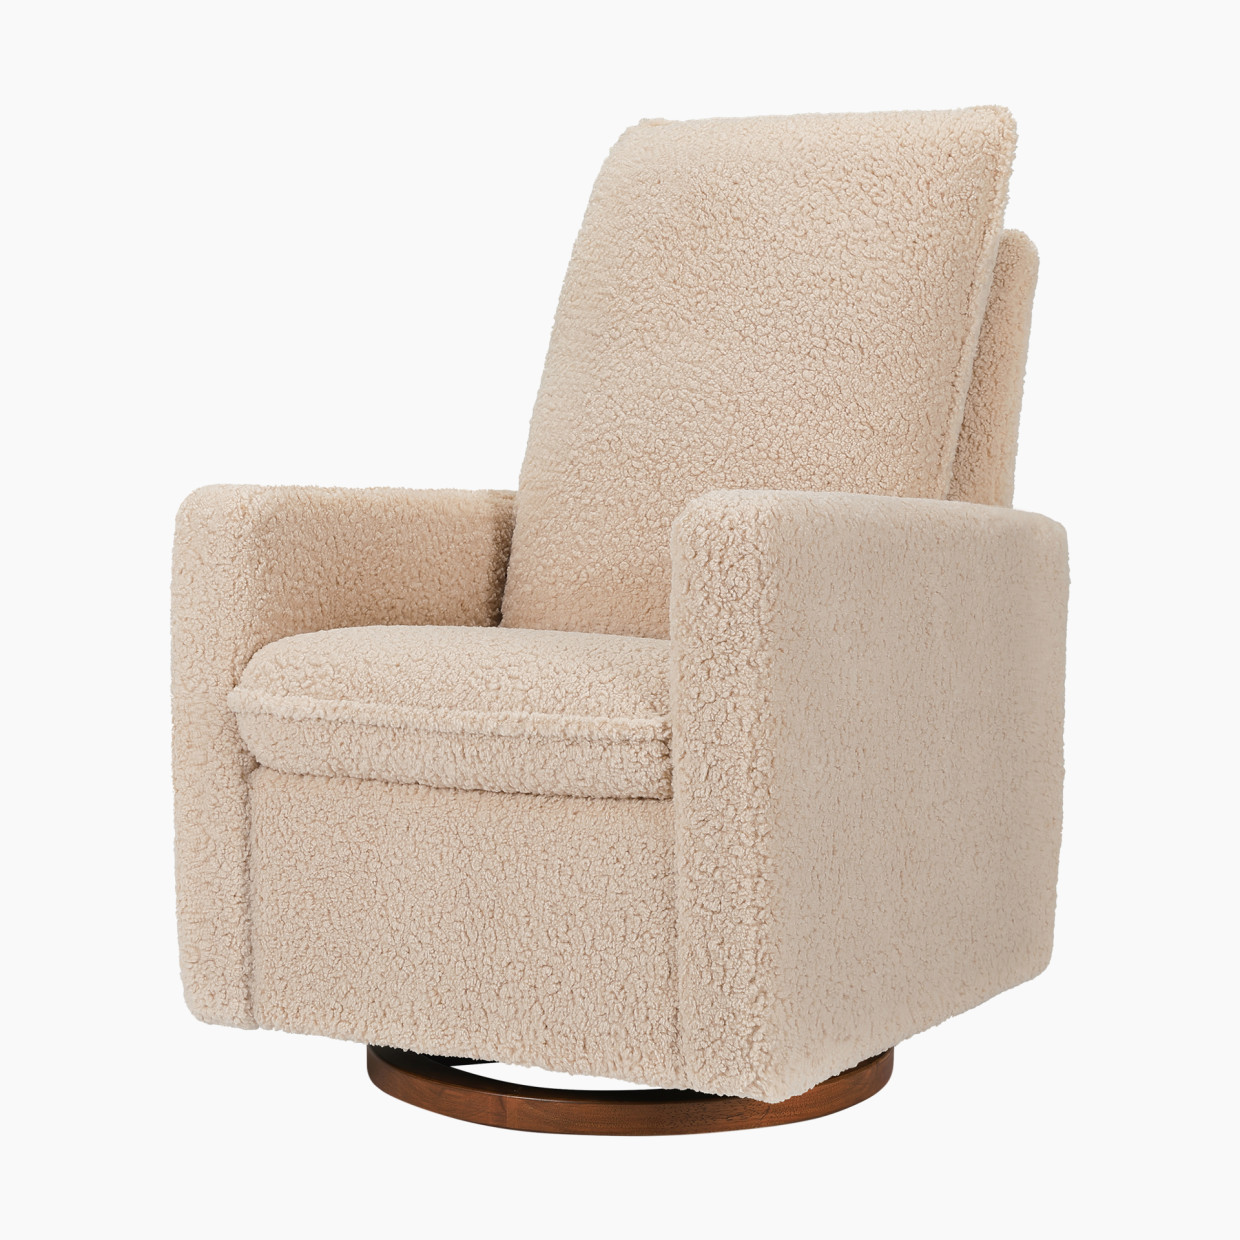 babyletto Cali Pillowback Swivel Glider - Chai Shearling With Dark Wood Base.